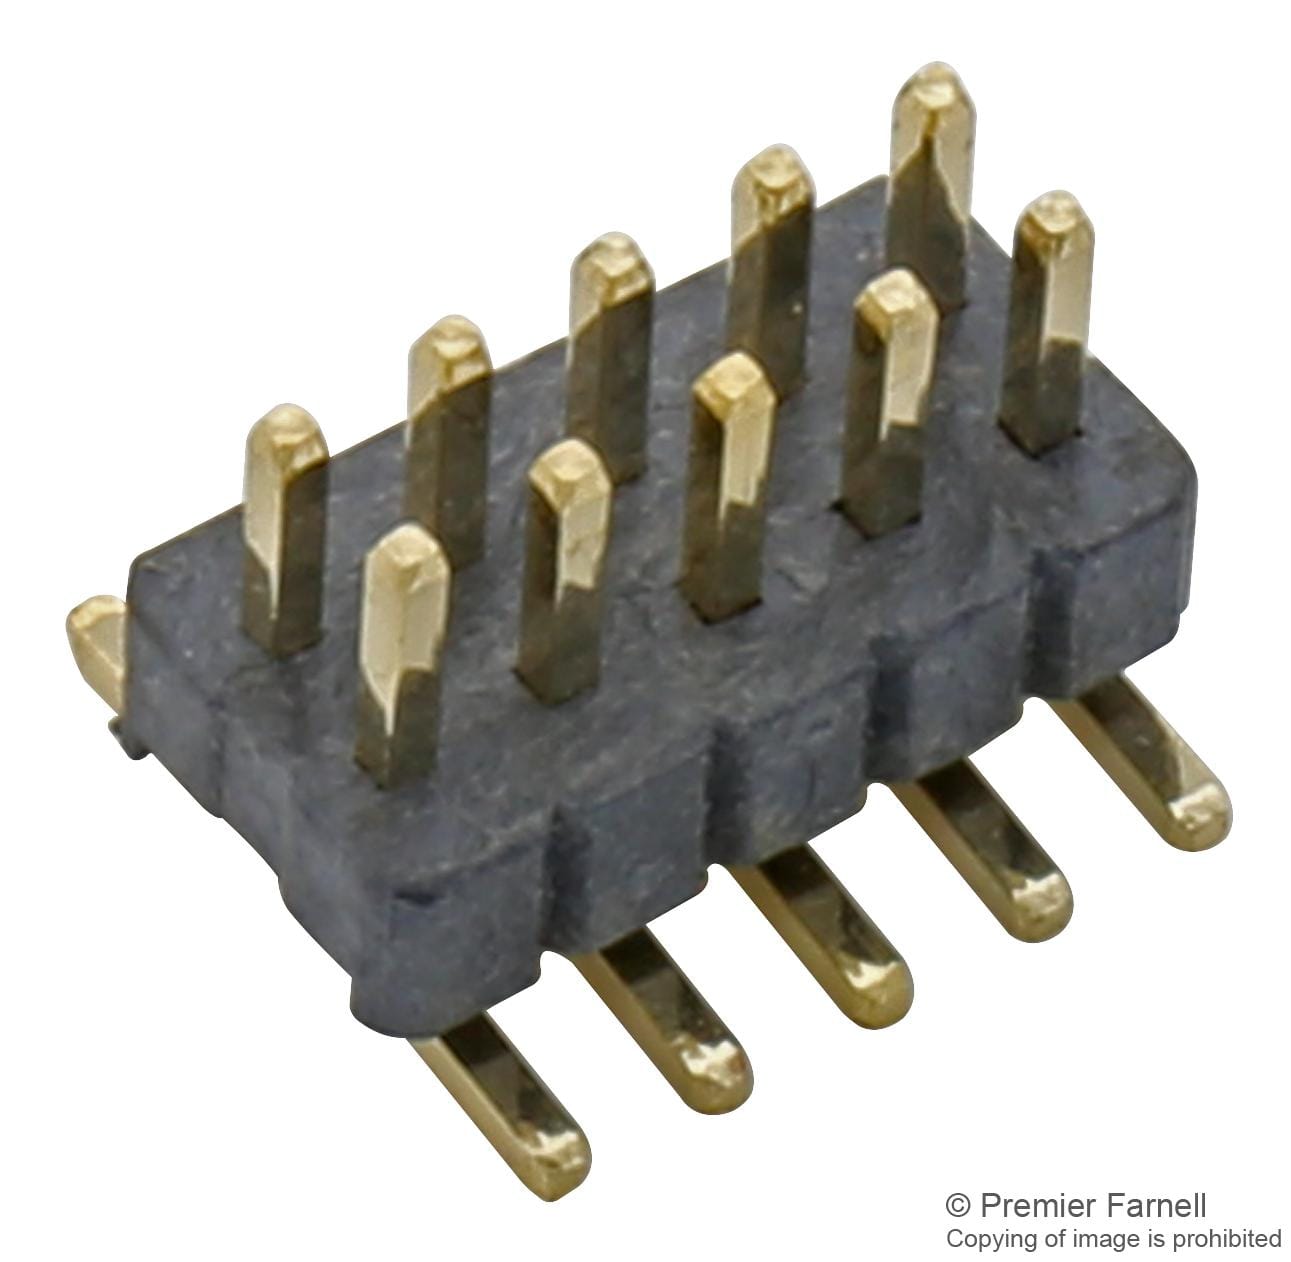 GCT (GLOBAL CONNECTOR TECHNOLOGY) Board-to-Board BD095-10A-A0-0200-0070-0570-LG CONNECTOR, HEADER, 10POS, 2ROW, 1.27MM GCT (GLOBAL CONNECTOR TECHNOLOGY) 2751428 BD095-10A-A0-0200-0070-0570-LG